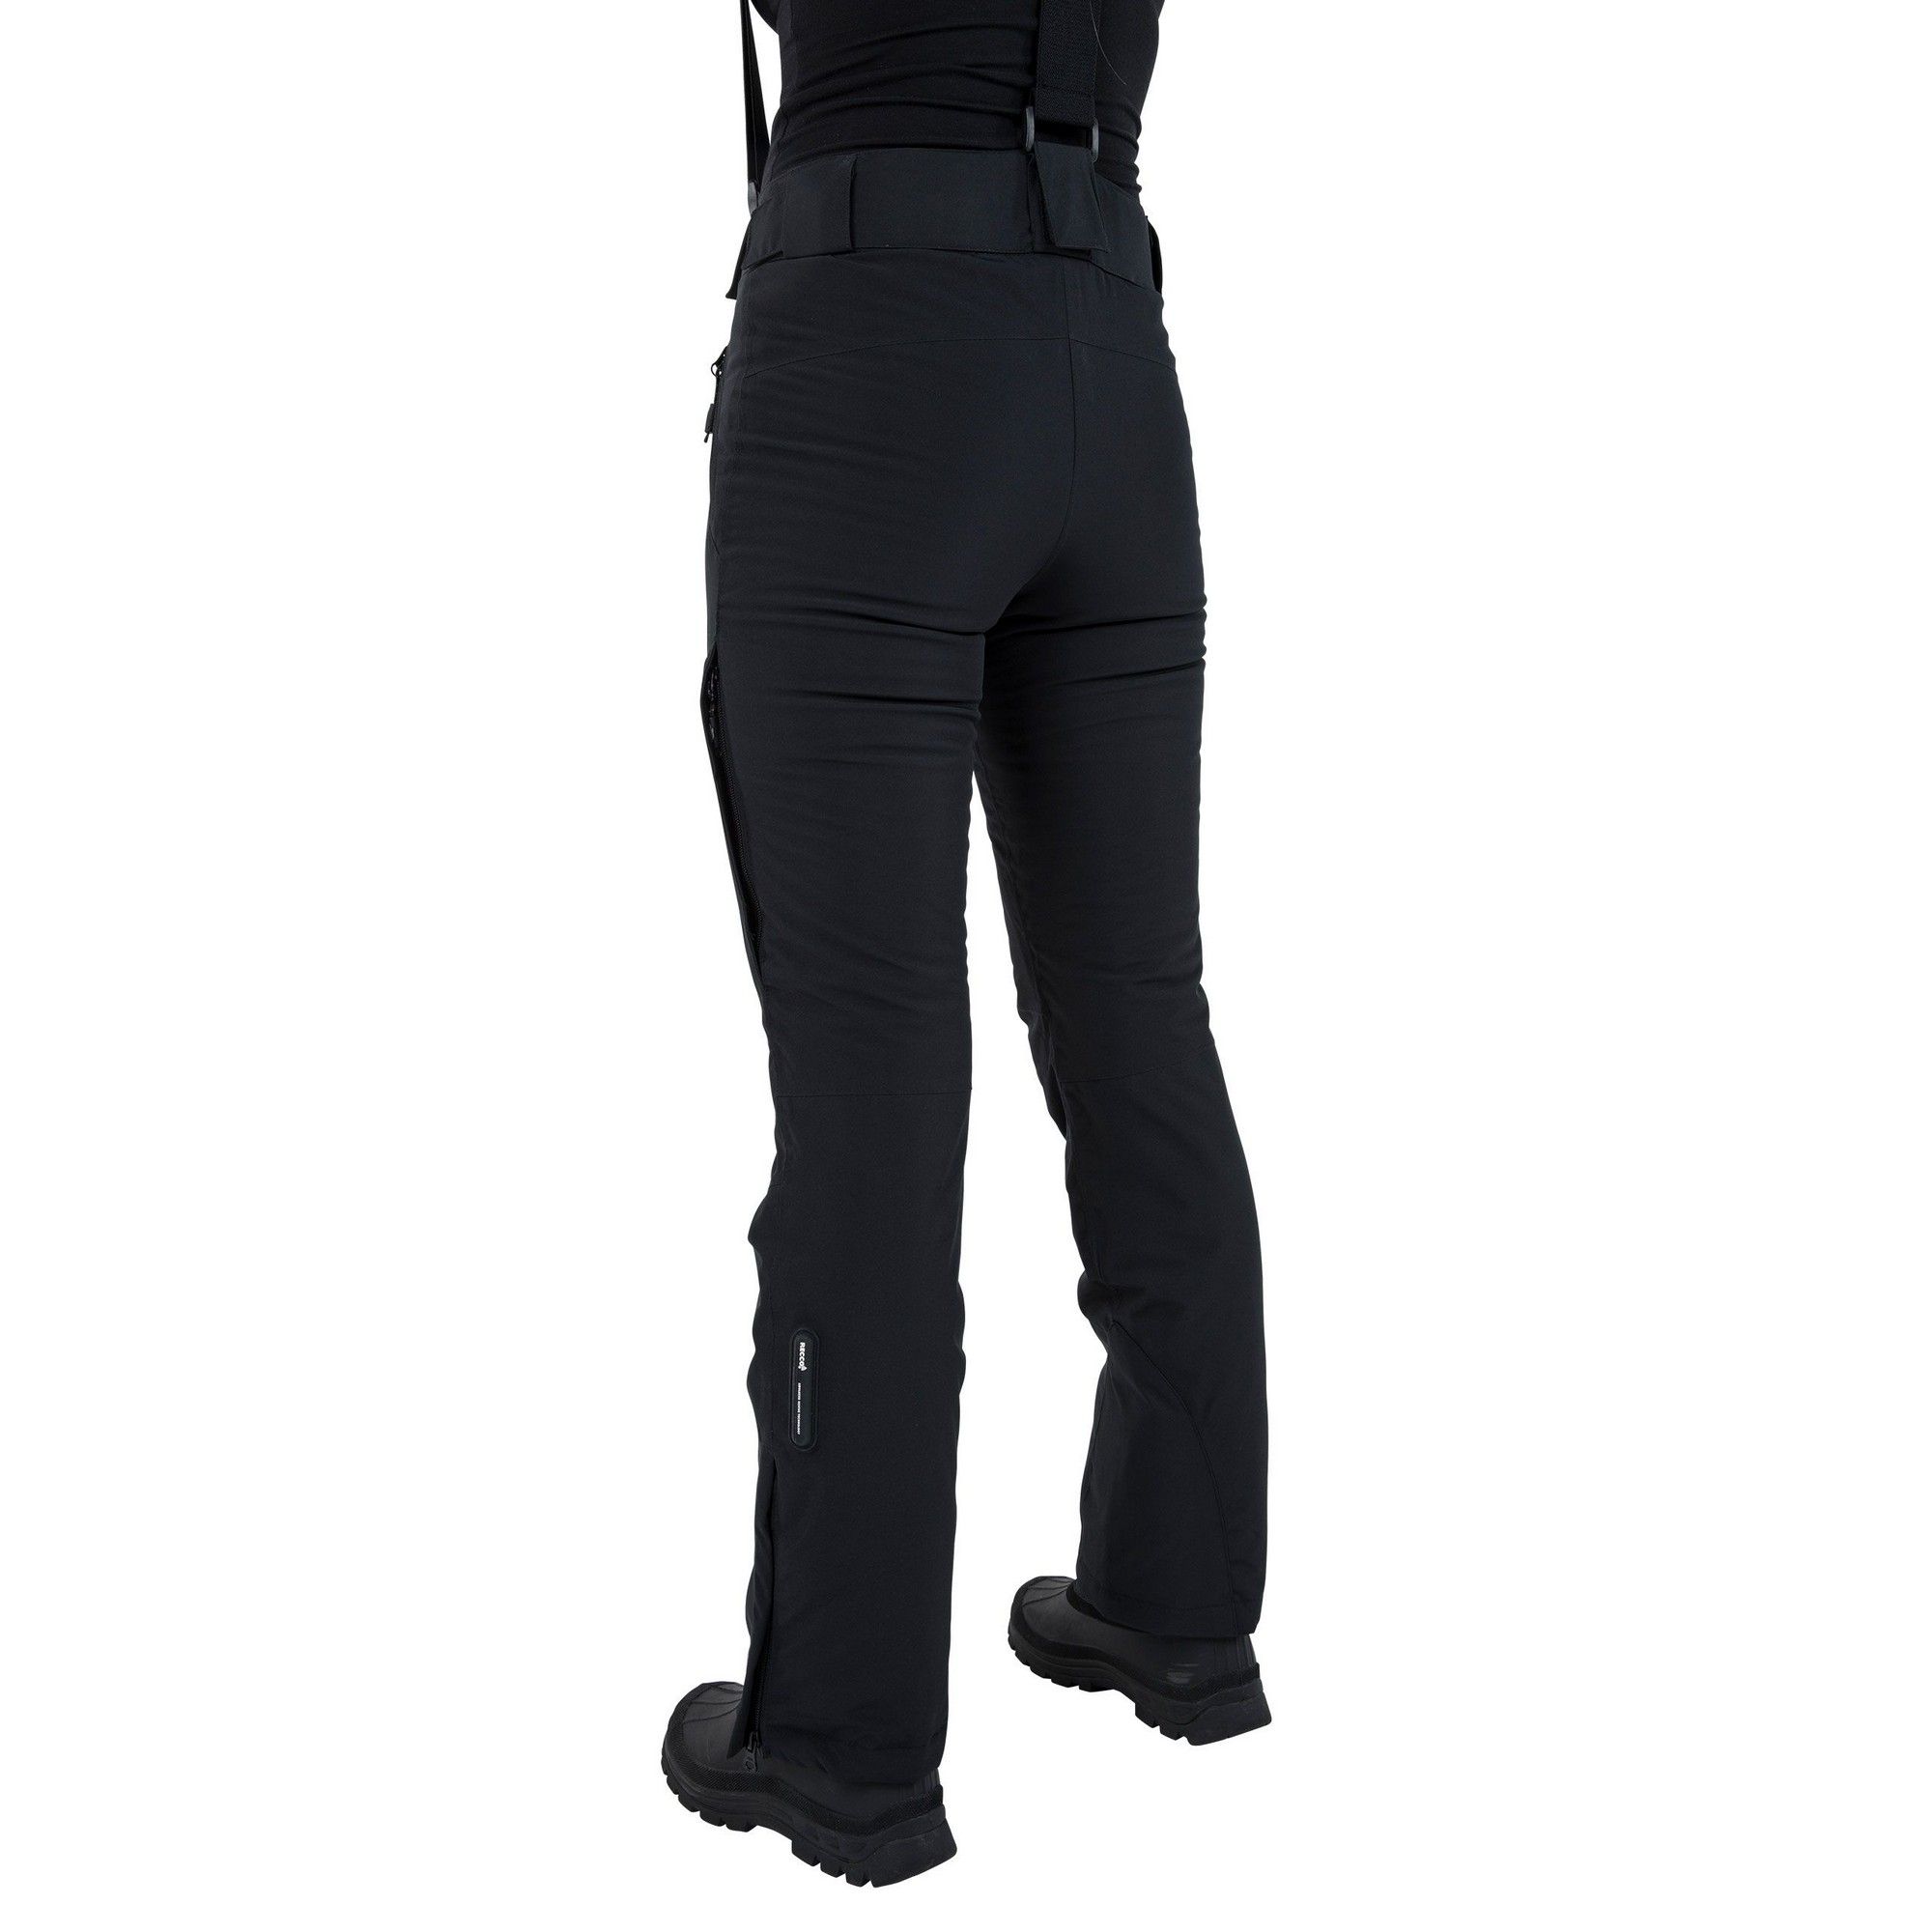 Lightly padded. Microfleece at seat and knees. Knitted. Shell - 92% polyester, 8% elastane. Lining - 100% polyester. 3 water repellent zip pockets. Detachable braces. Side leg ventilation zips. Side ankle zip with facing. Ankle gaiters. Slim fit.